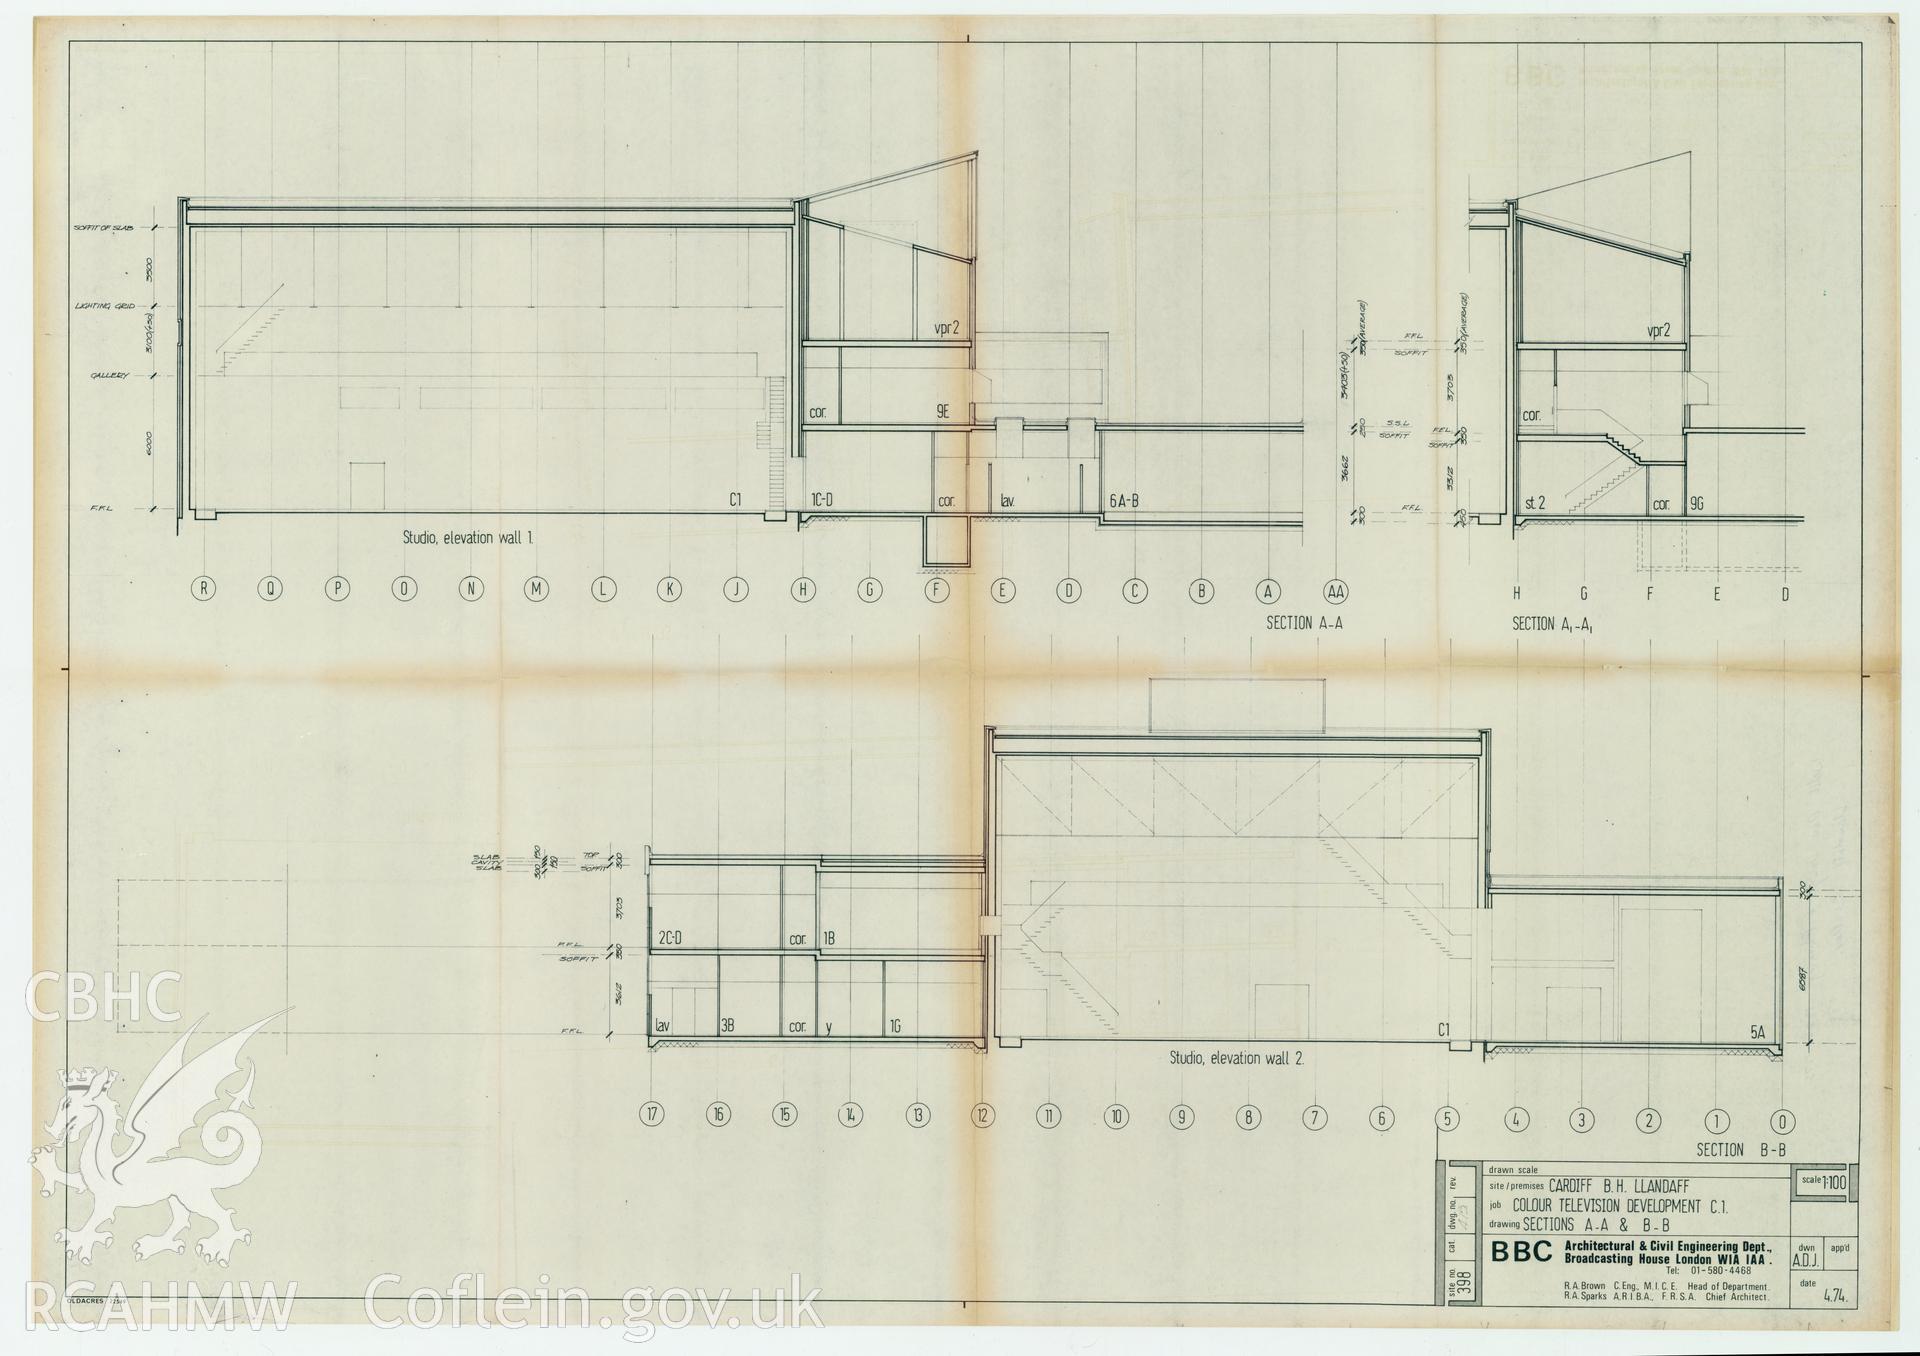 Digitised drawing plan of Llandaff production studio C1 - Colour TV development. Sections A-A and B-B. Drawing no. 415, April 1974.